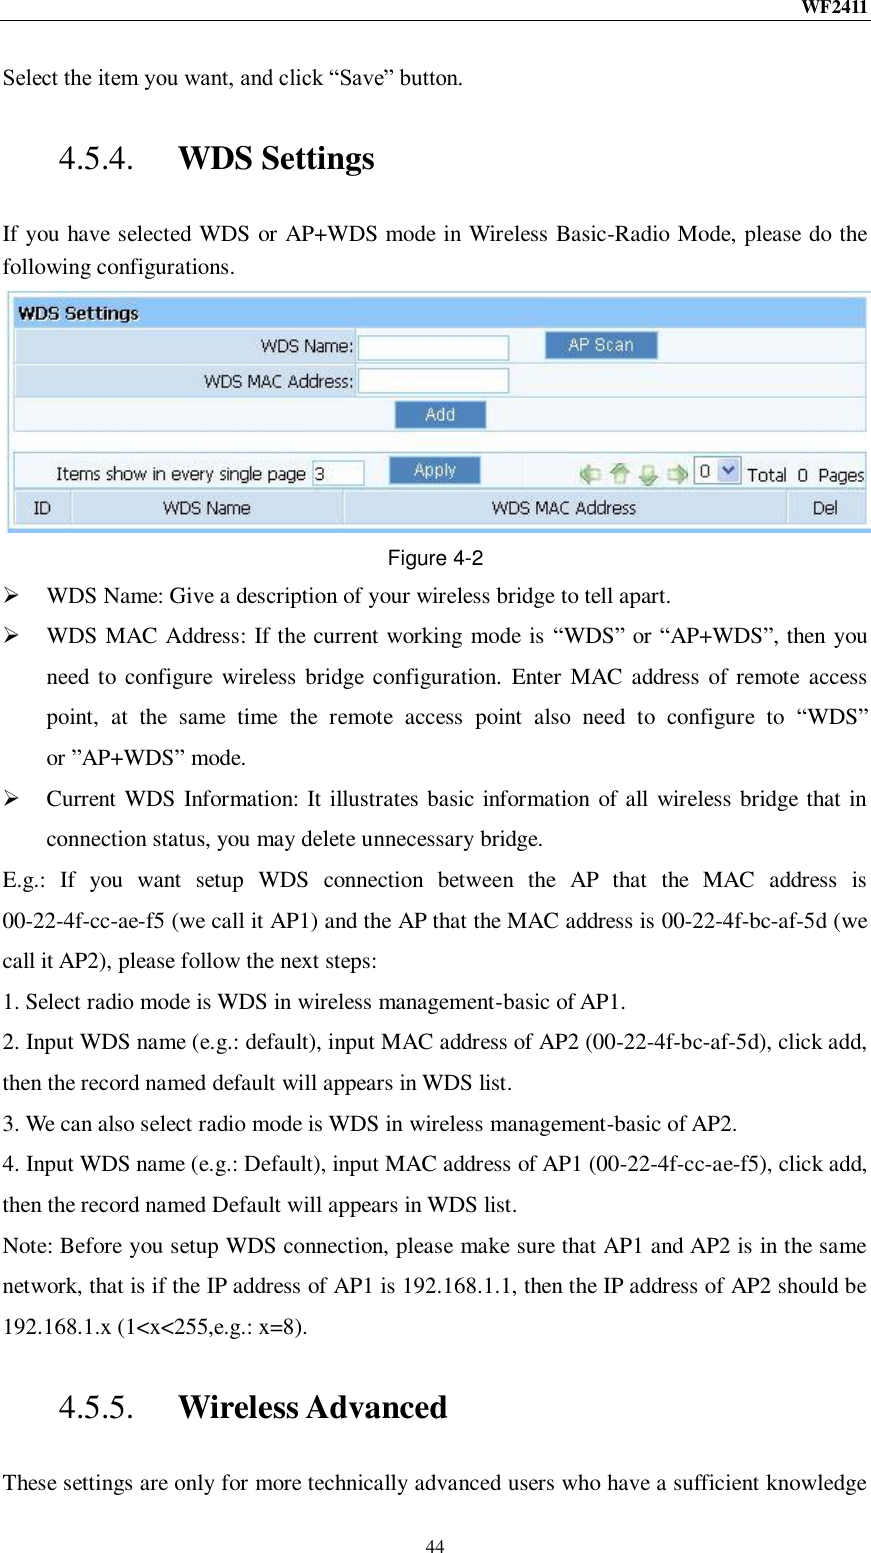 WF2411  44 Select the item you want, and click “Save” button. 4.5.4. WDS Settings If you have selected WDS or AP+WDS mode in Wireless Basic-Radio Mode, please do the following configurations.  Figure 4-2  WDS Name: Give a description of your wireless bridge to tell apart.  WDS MAC Address: If the current working mode is “WDS” or “AP+WDS”, then you need to configure  wireless bridge configuration.  Enter  MAC address of remote access point,  at  the  same  time  the  remote  access  point  also  need  to  configure  to  “WDS” or ”AP+WDS” mode.  Current WDS Information: It illustrates basic information of all wireless bridge that in connection status, you may delete unnecessary bridge. E.g.:  If  you  want  setup  WDS  connection  between  the  AP  that  the  MAC  address  is 00-22-4f-cc-ae-f5 (we call it AP1) and the AP that the MAC address is 00-22-4f-bc-af-5d (we call it AP2), please follow the next steps: 1. Select radio mode is WDS in wireless management-basic of AP1. 2. Input WDS name (e.g.: default), input MAC address of AP2 (00-22-4f-bc-af-5d), click add, then the record named default will appears in WDS list. 3. We can also select radio mode is WDS in wireless management-basic of AP2. 4. Input WDS name (e.g.: Default), input MAC address of AP1 (00-22-4f-cc-ae-f5), click add, then the record named Default will appears in WDS list. Note: Before you setup WDS connection, please make sure that AP1 and AP2 is in the same network, that is if the IP address of AP1 is 192.168.1.1, then the IP address of AP2 should be 192.168.1.x (1&lt;x&lt;255,e.g.: x=8). 4.5.5. Wireless Advanced These settings are only for more technically advanced users who have a sufficient knowledge 